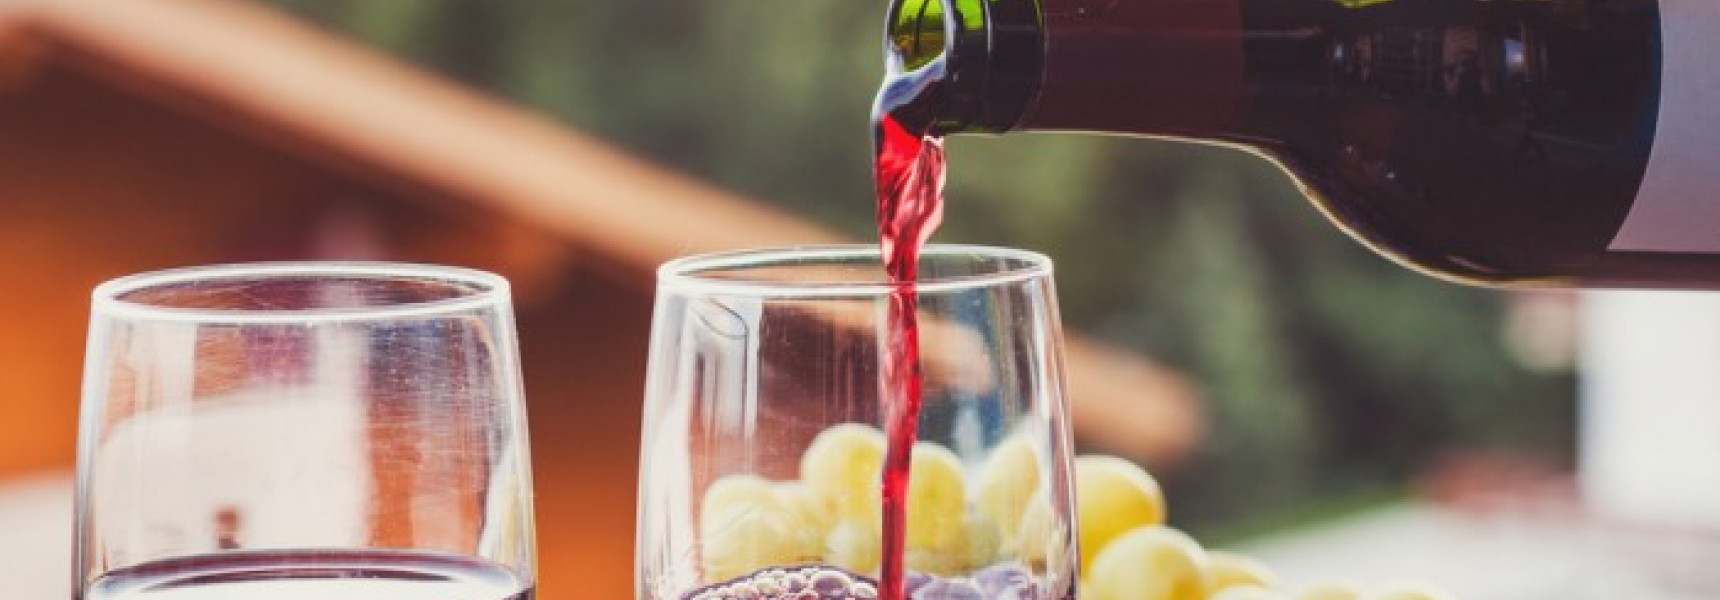 Beginners guide to wine tasting in France